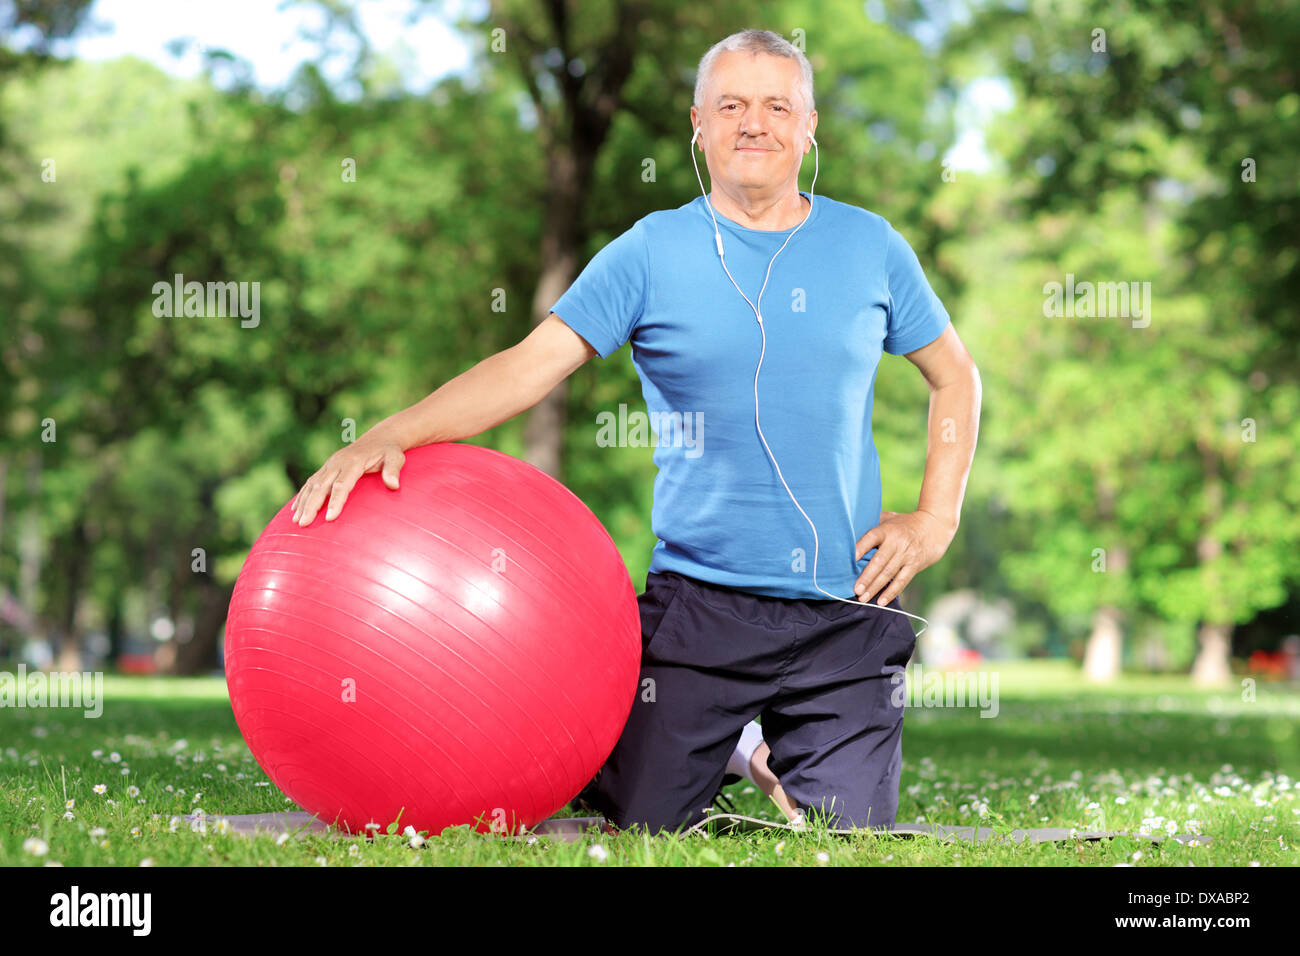 Mature man with an exercise ball in a park Stock Photo